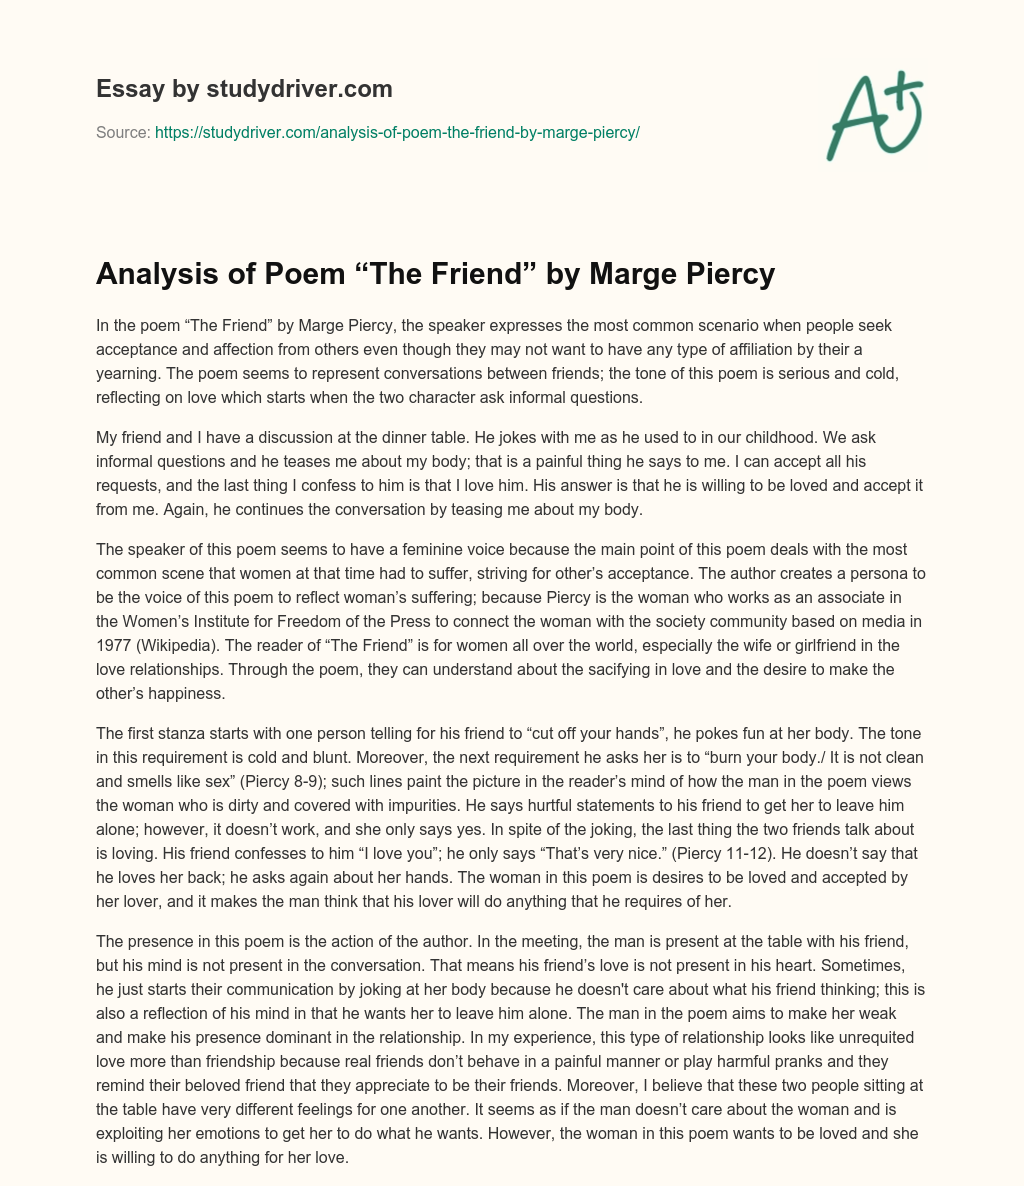 Analysis of Poem “The Friend” by Marge Piercy essay